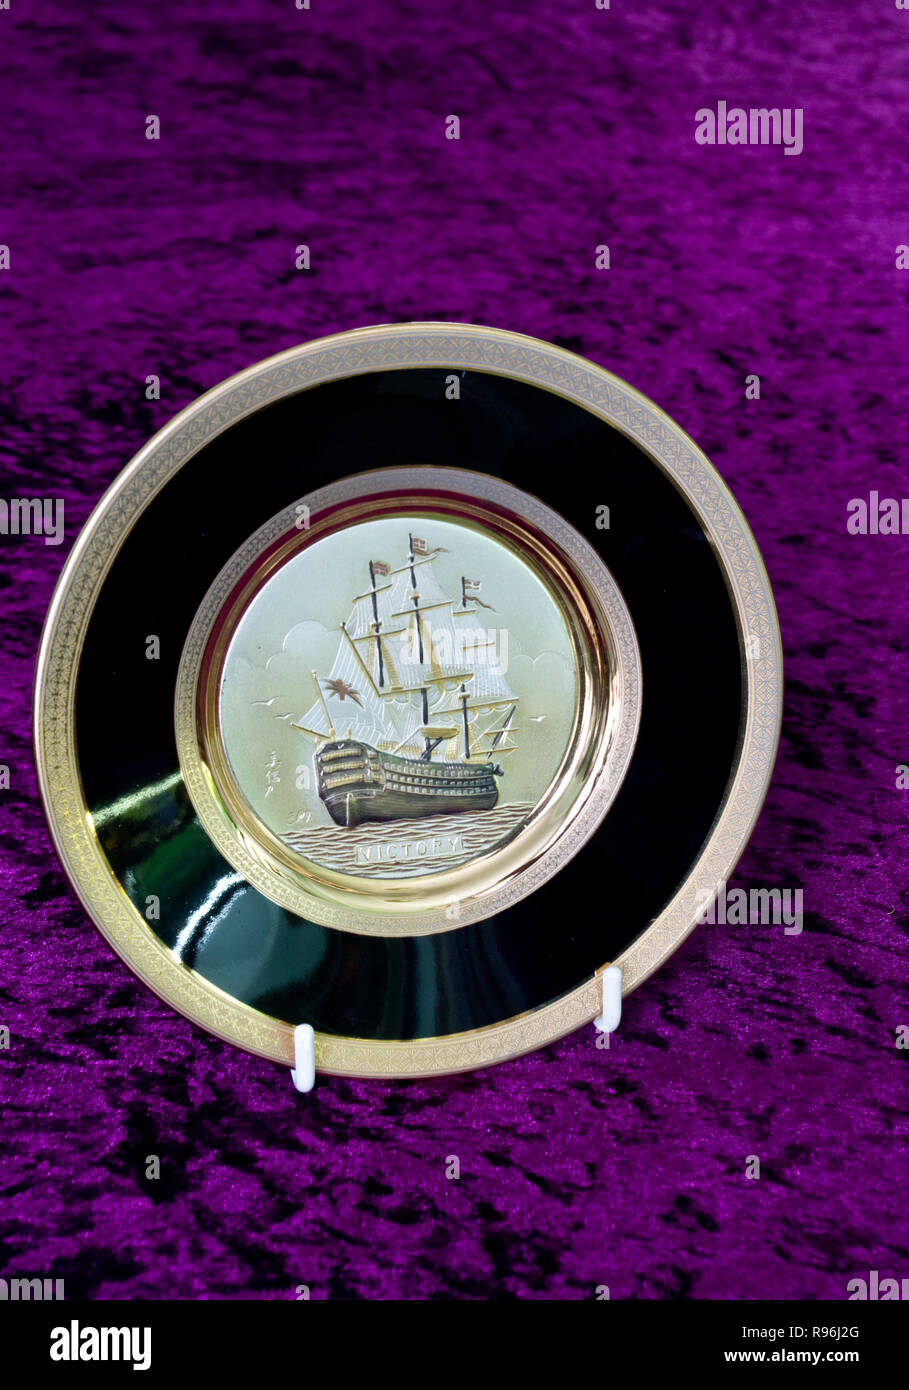 Chokin Decorative Plates Decorated with 24 Karat Gold Leaf depicting The HMS Victory Warship Stock Photo